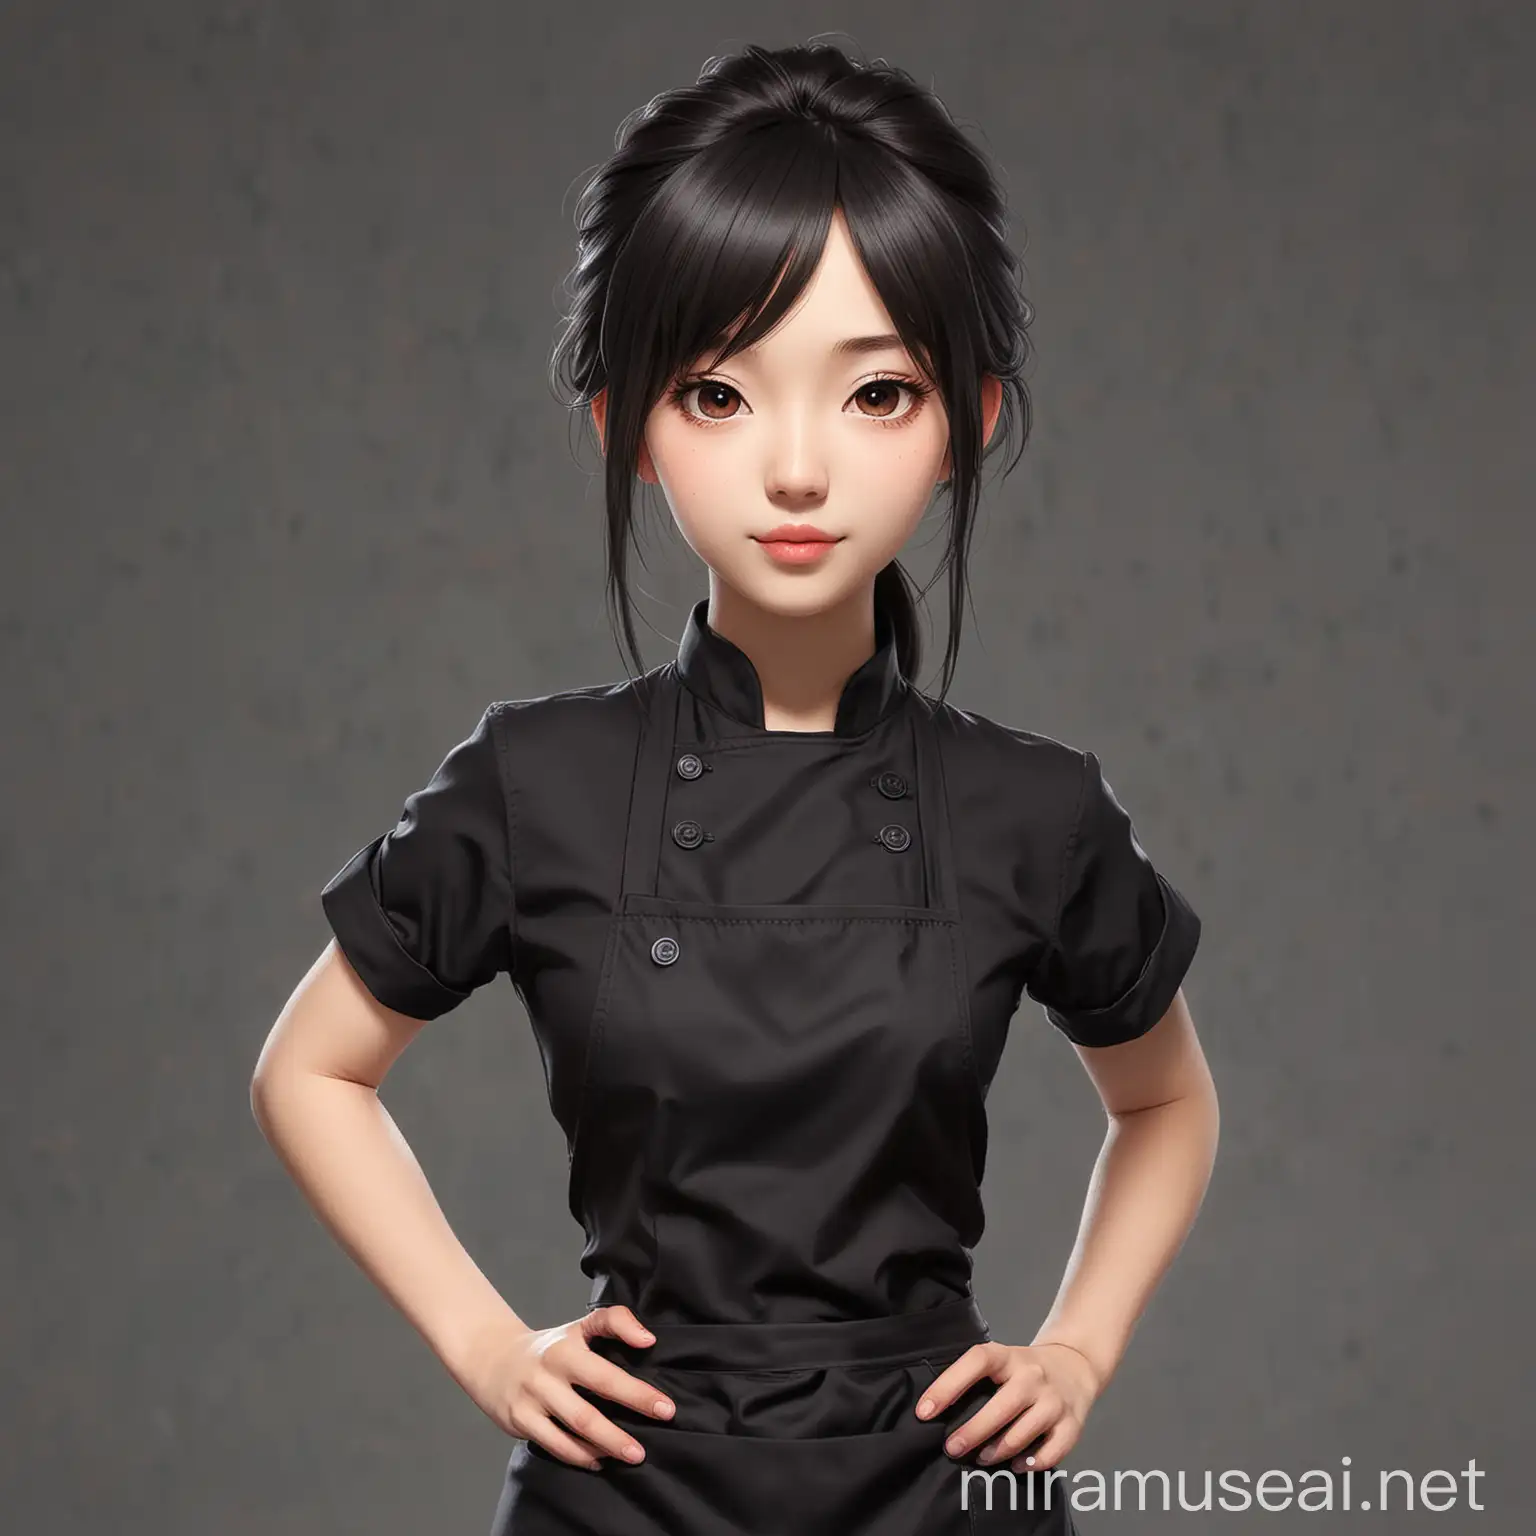 young woman chef wearing black shirt with black apron asian girl white 3rd anime
